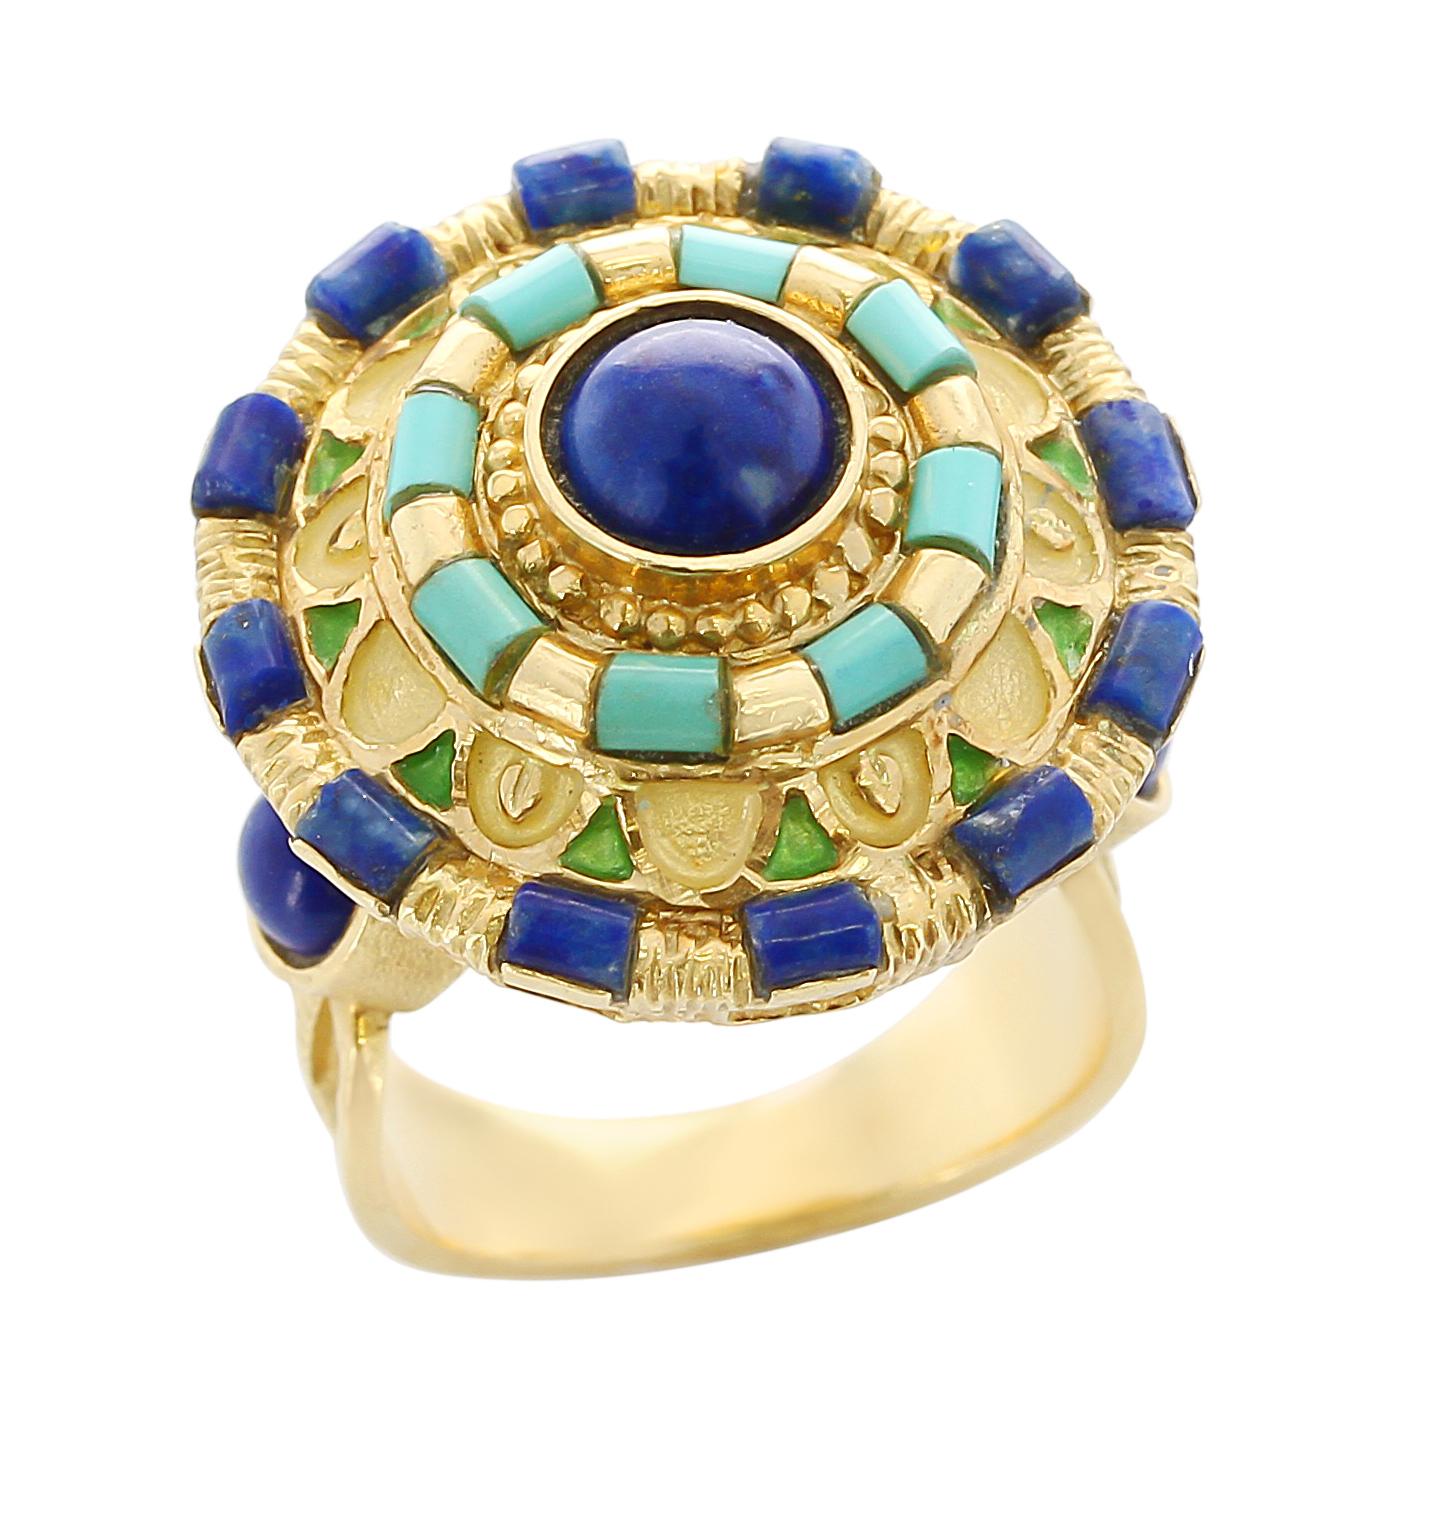 A Circular Lapis and Turquoise Artistic Statement Ring, with Green Enamel and 18 Karat Yellow Gold. Total Weight: 19.50 grams, Ring Size US 8.